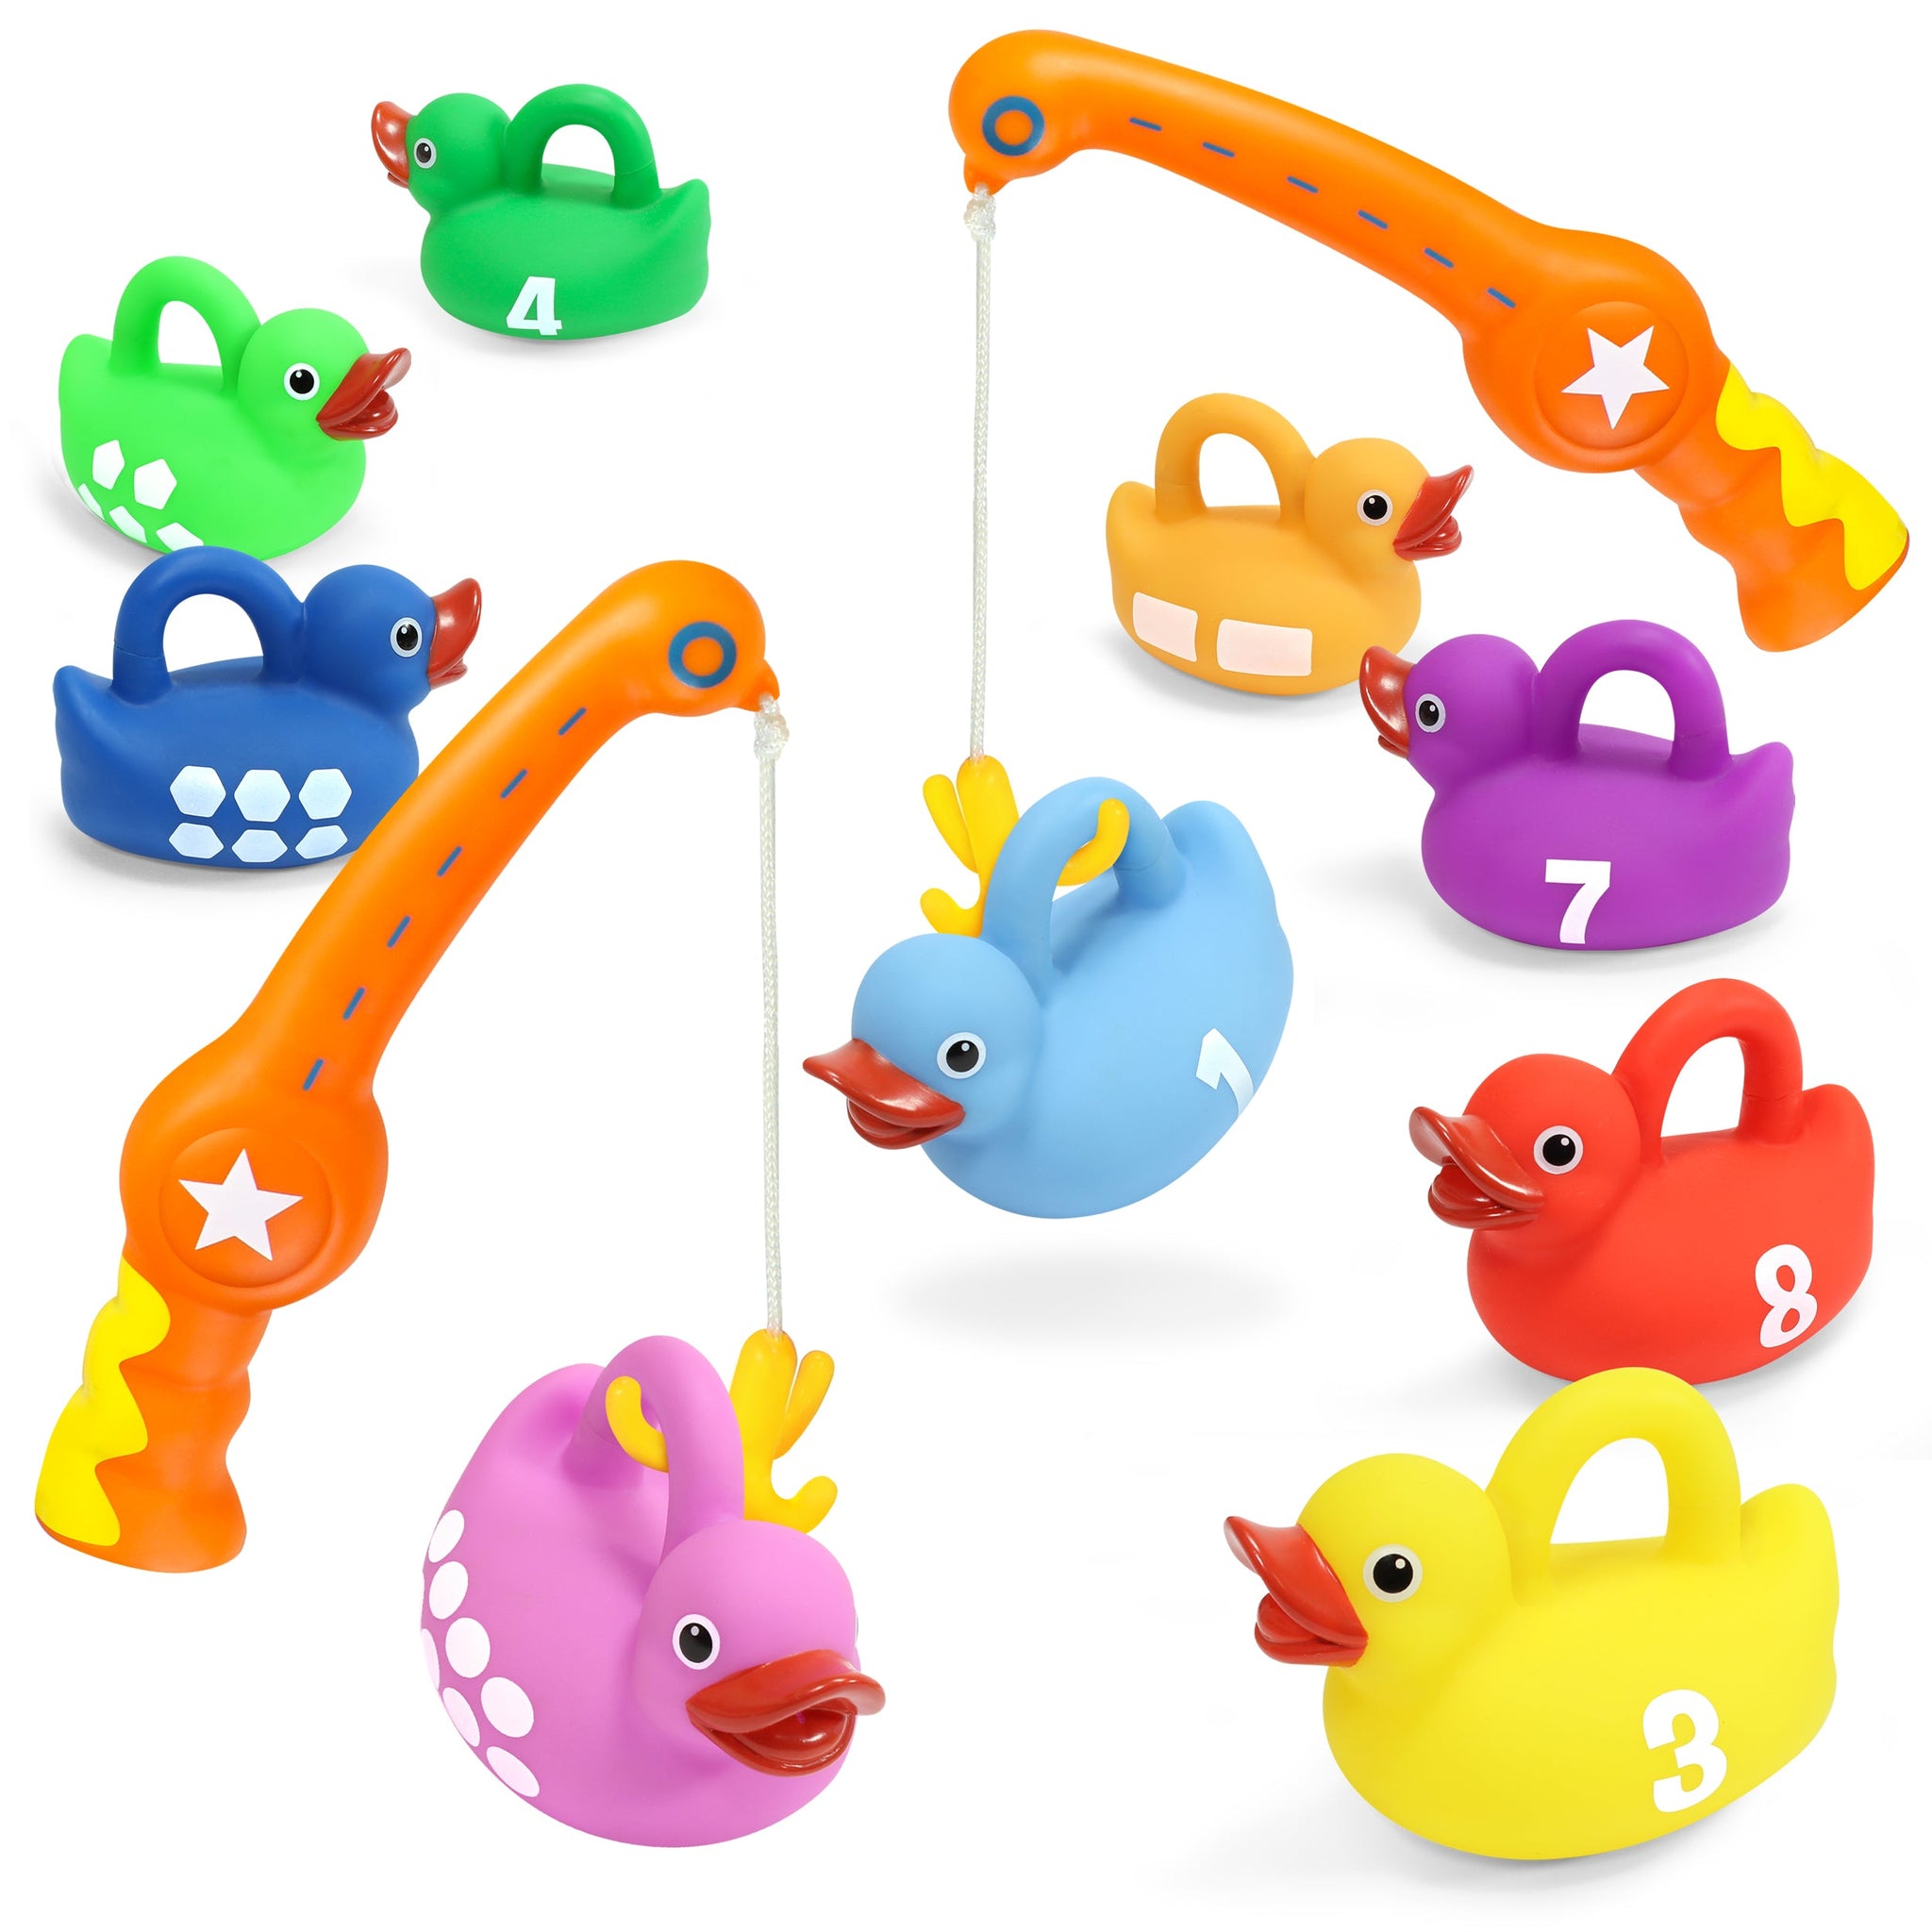 Kids Fishing Bath Toy Duck Fishing Toys 1 Pole And 7 Ducks Toddler